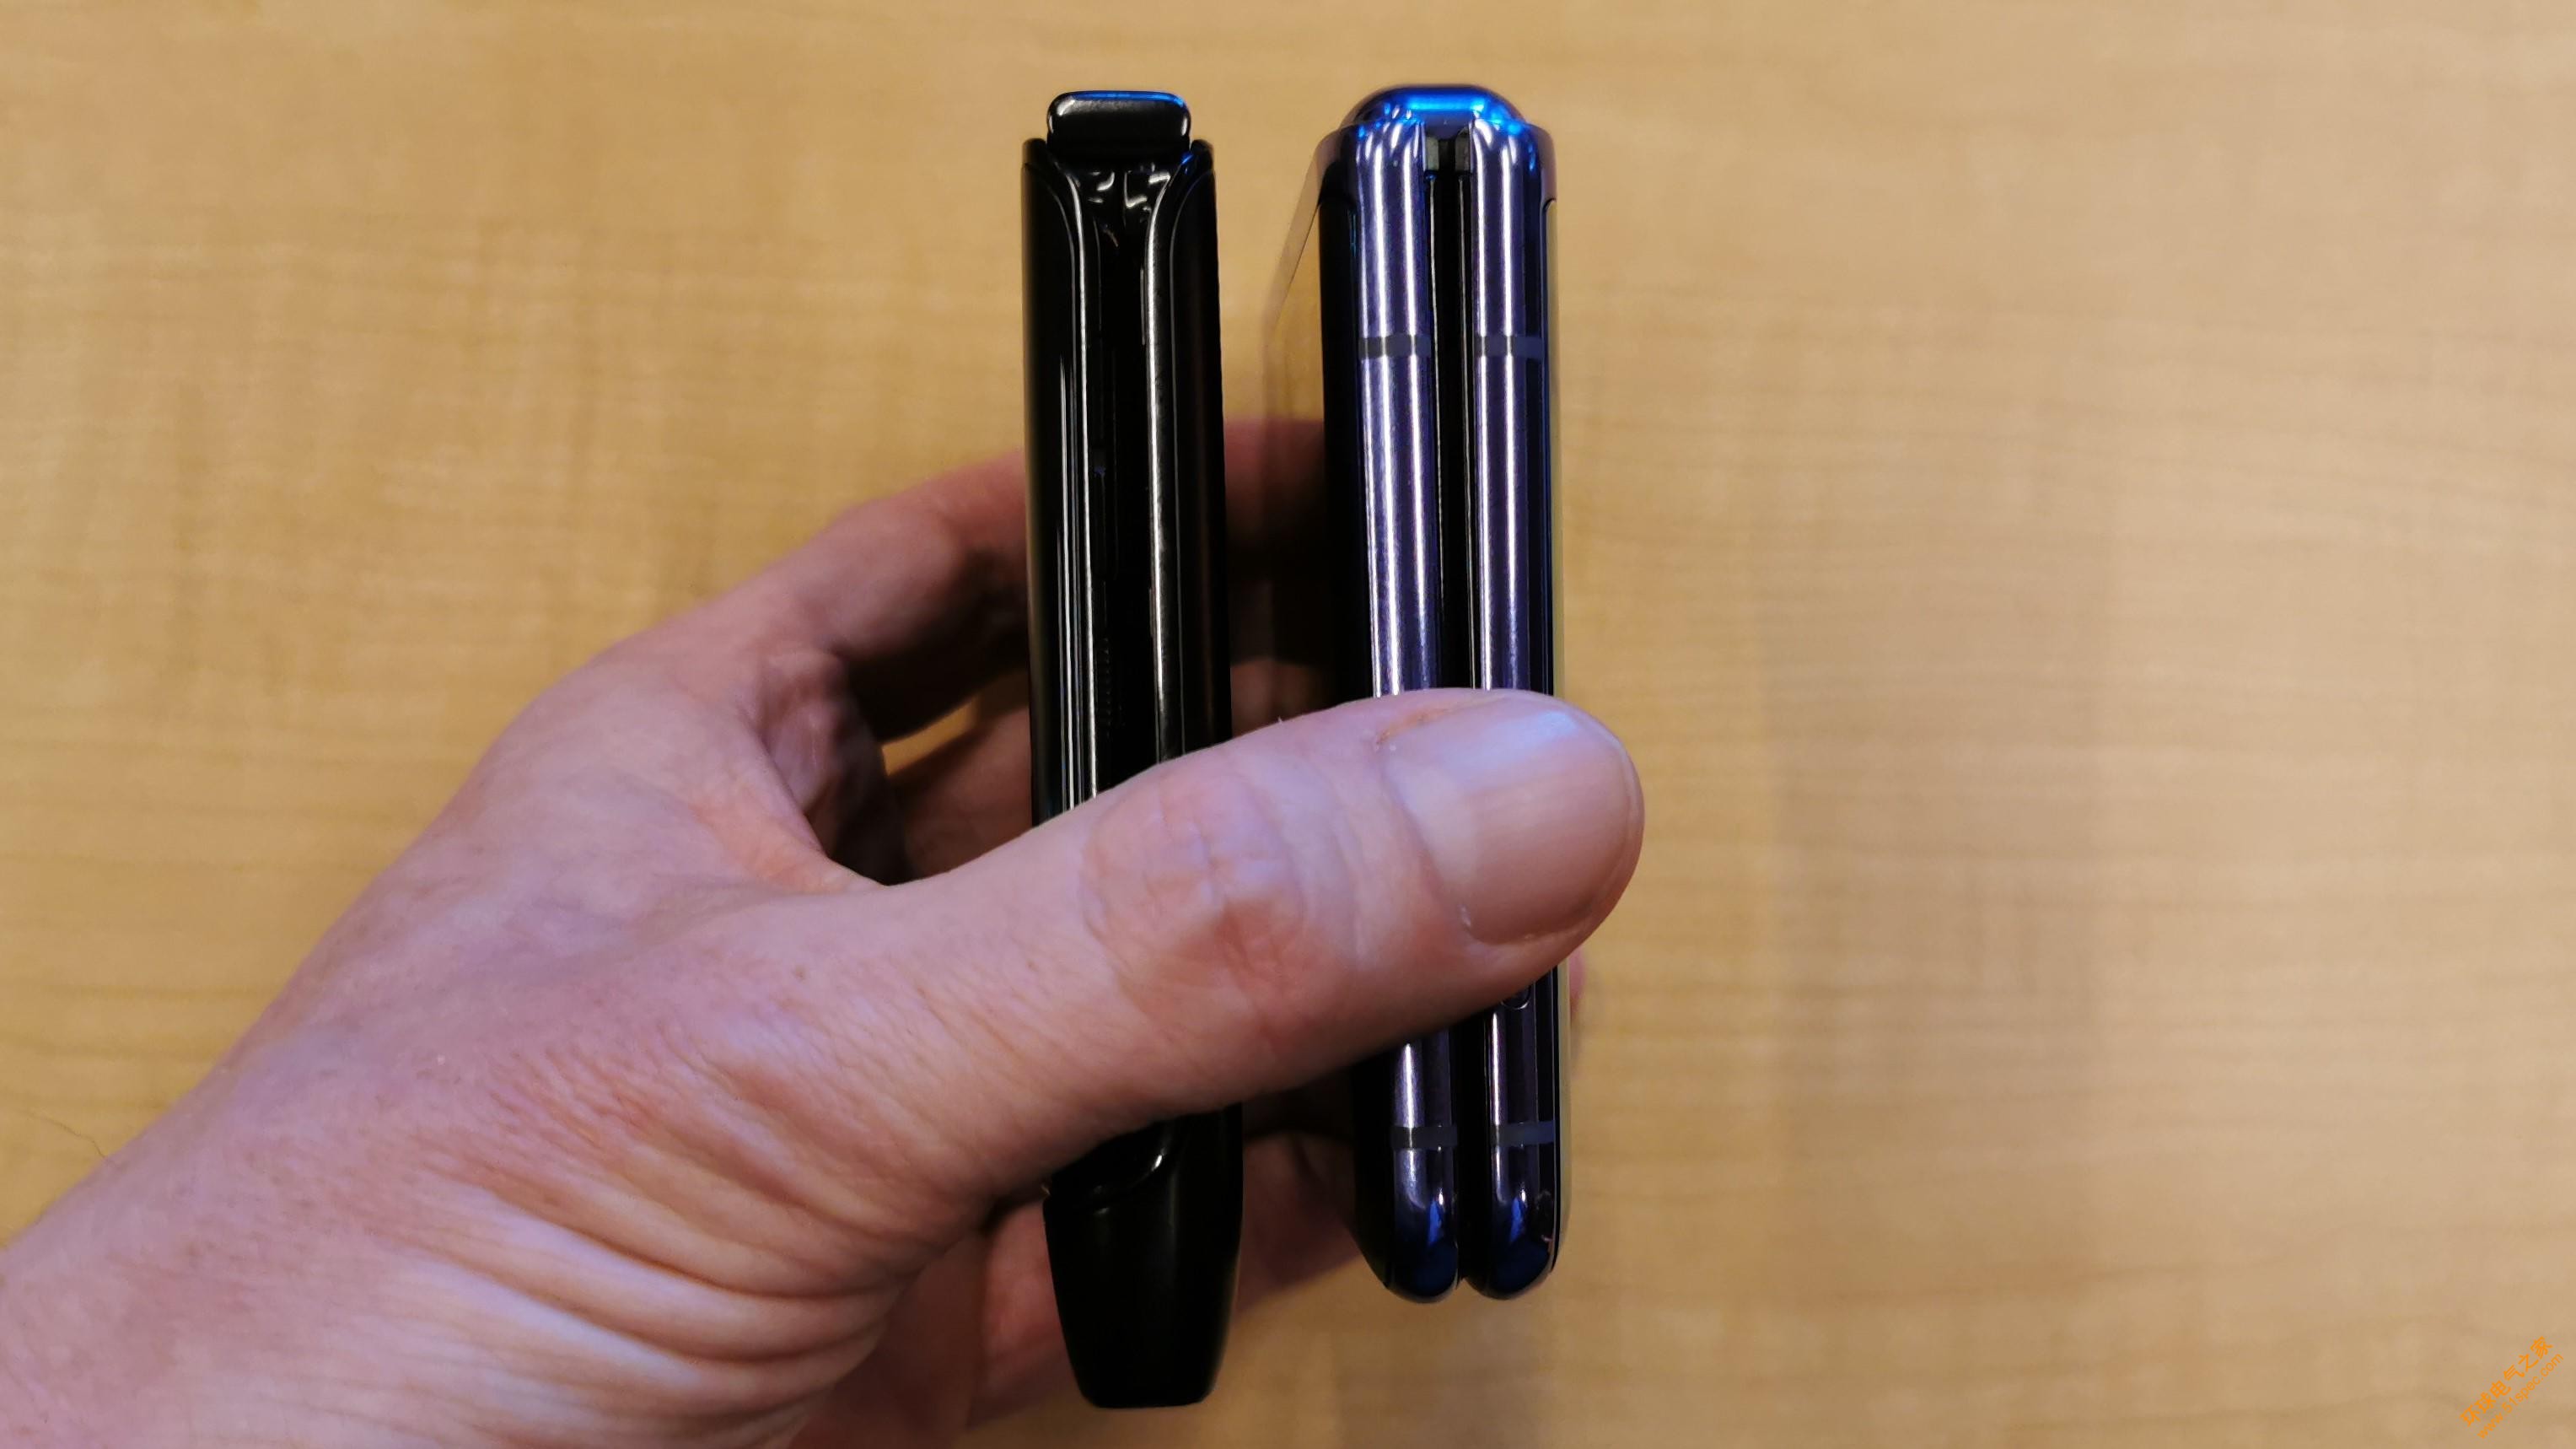 The Z Flip (right) is slightly thicker than the Razr (left).